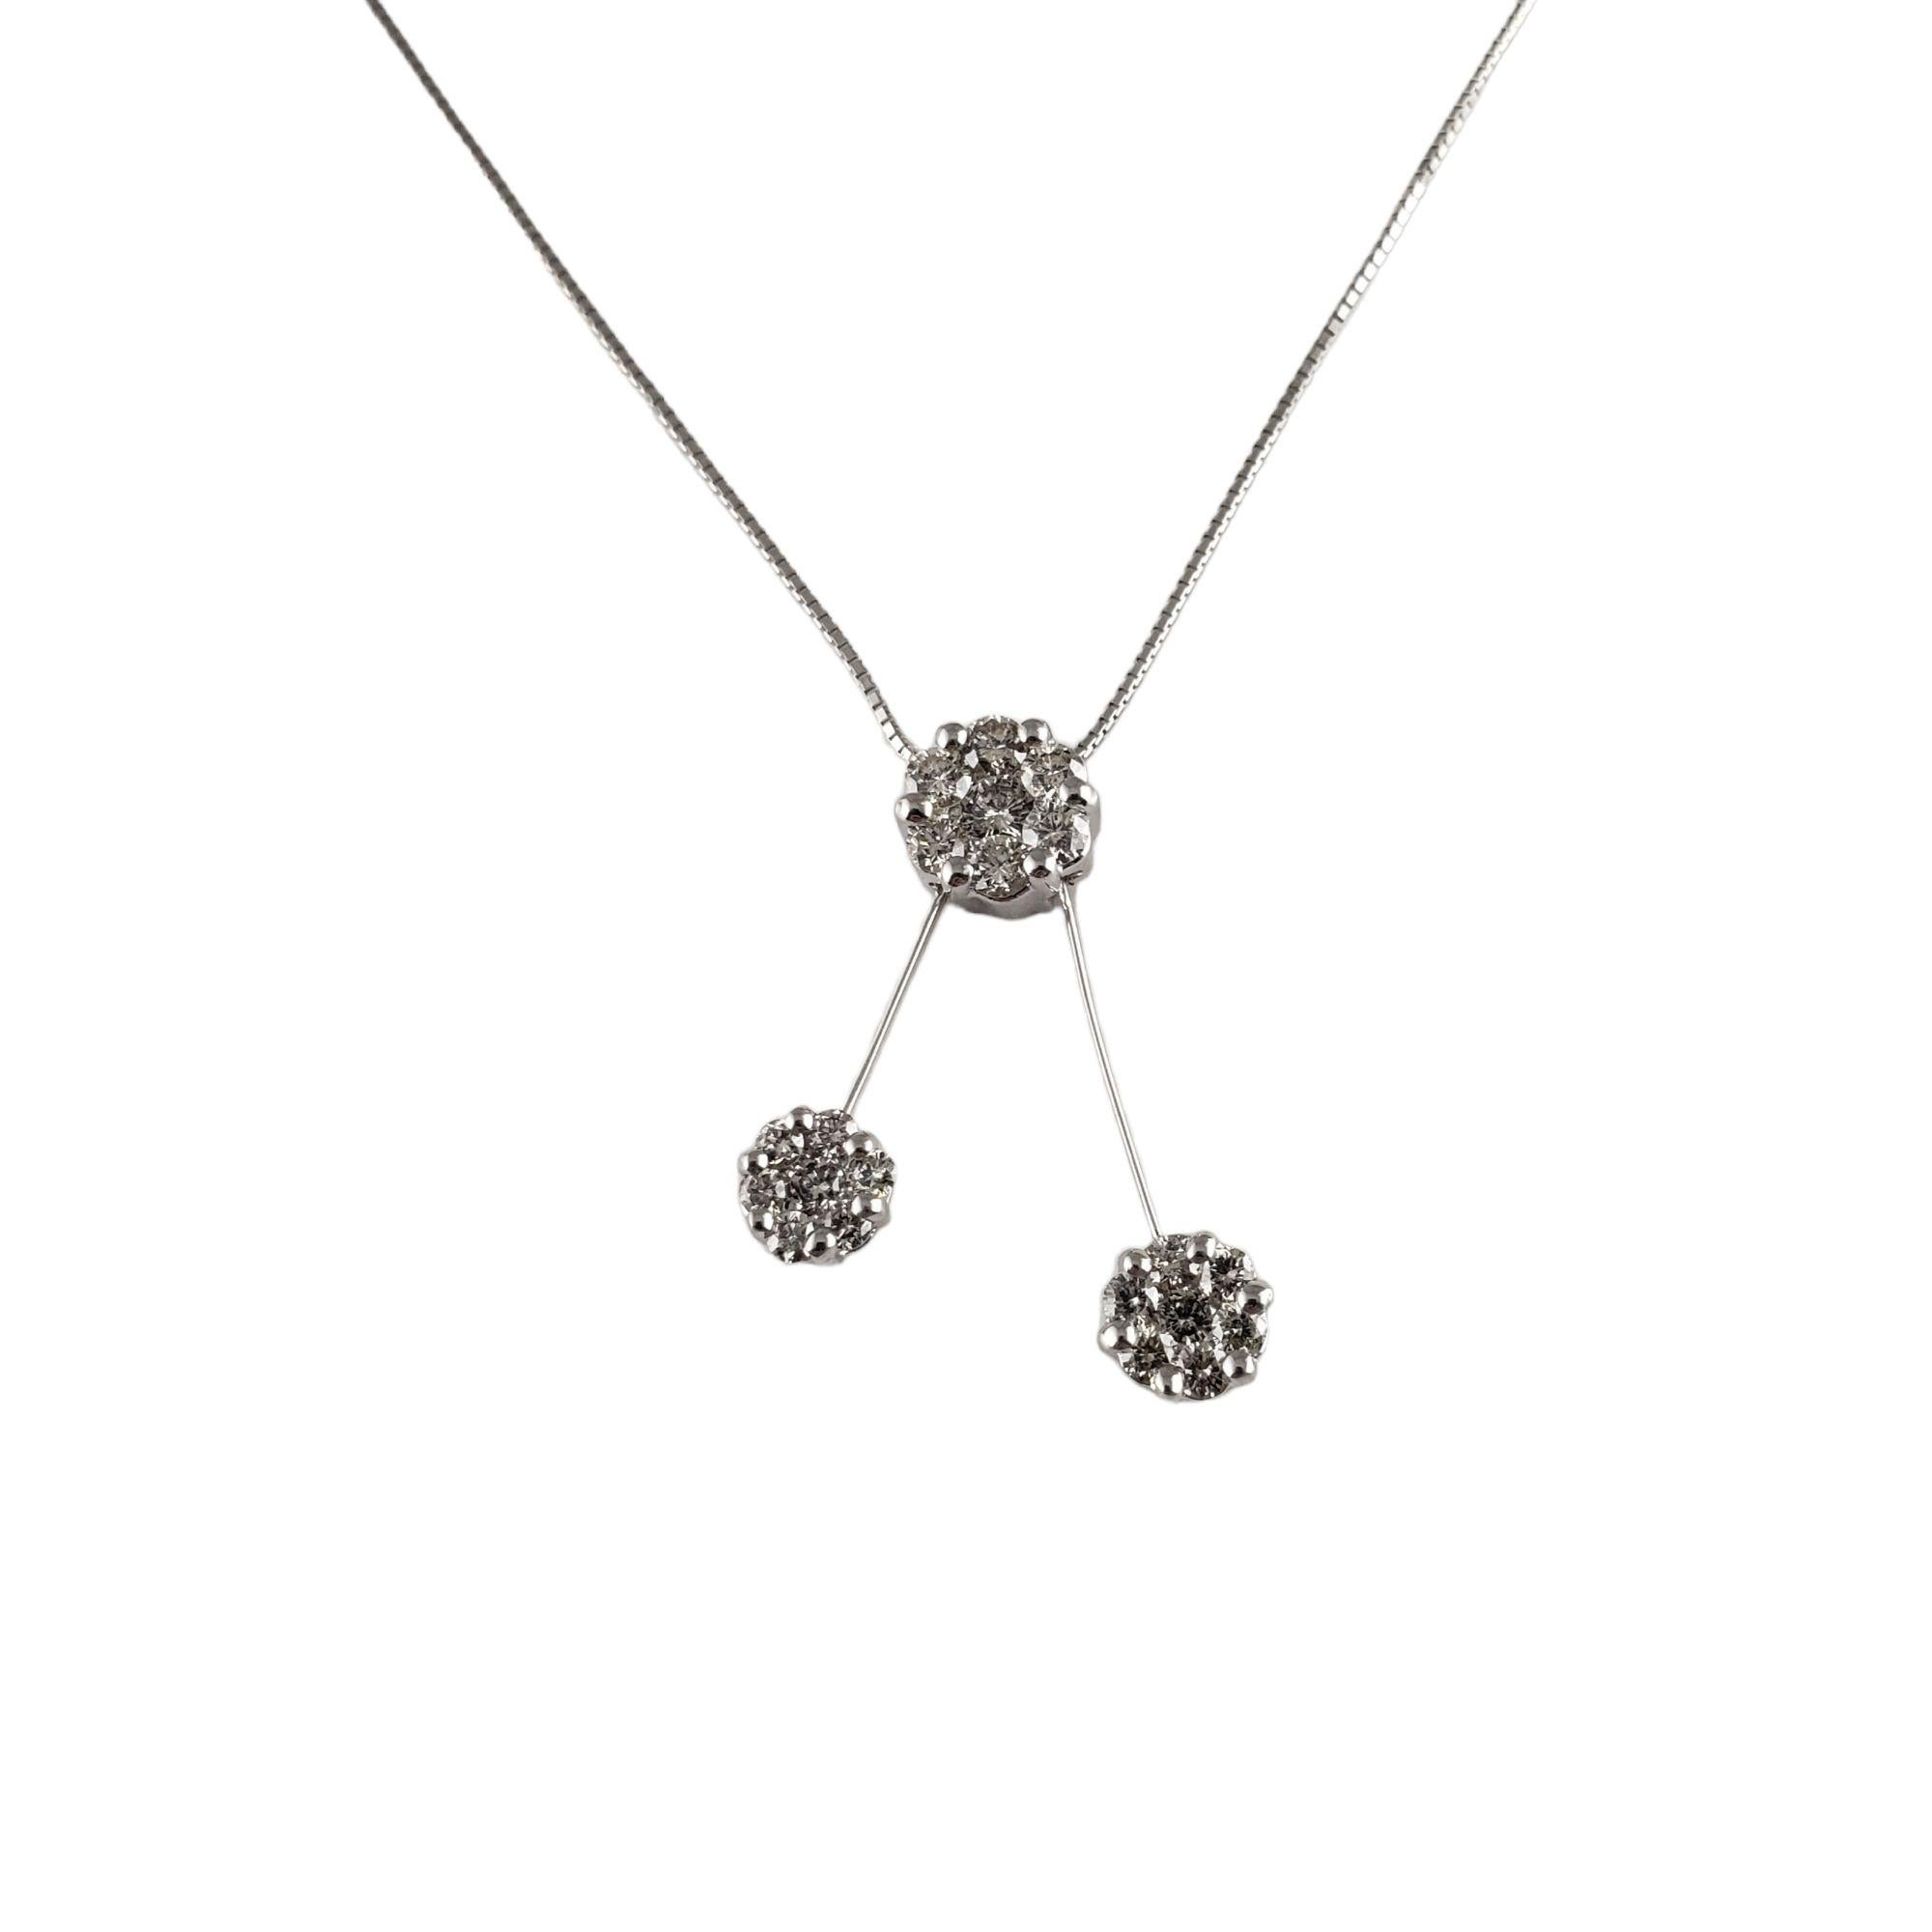 Vintage 18 Karat White Gold and Diamond Pendant Necklace-

This sparkling 18K white gold necklace features 21 round brilliant cut diamonds set in a lovely floral design.

Approximate total diamond weight: .98 ct.

Diamond clarity: SI2-I1

Diamond